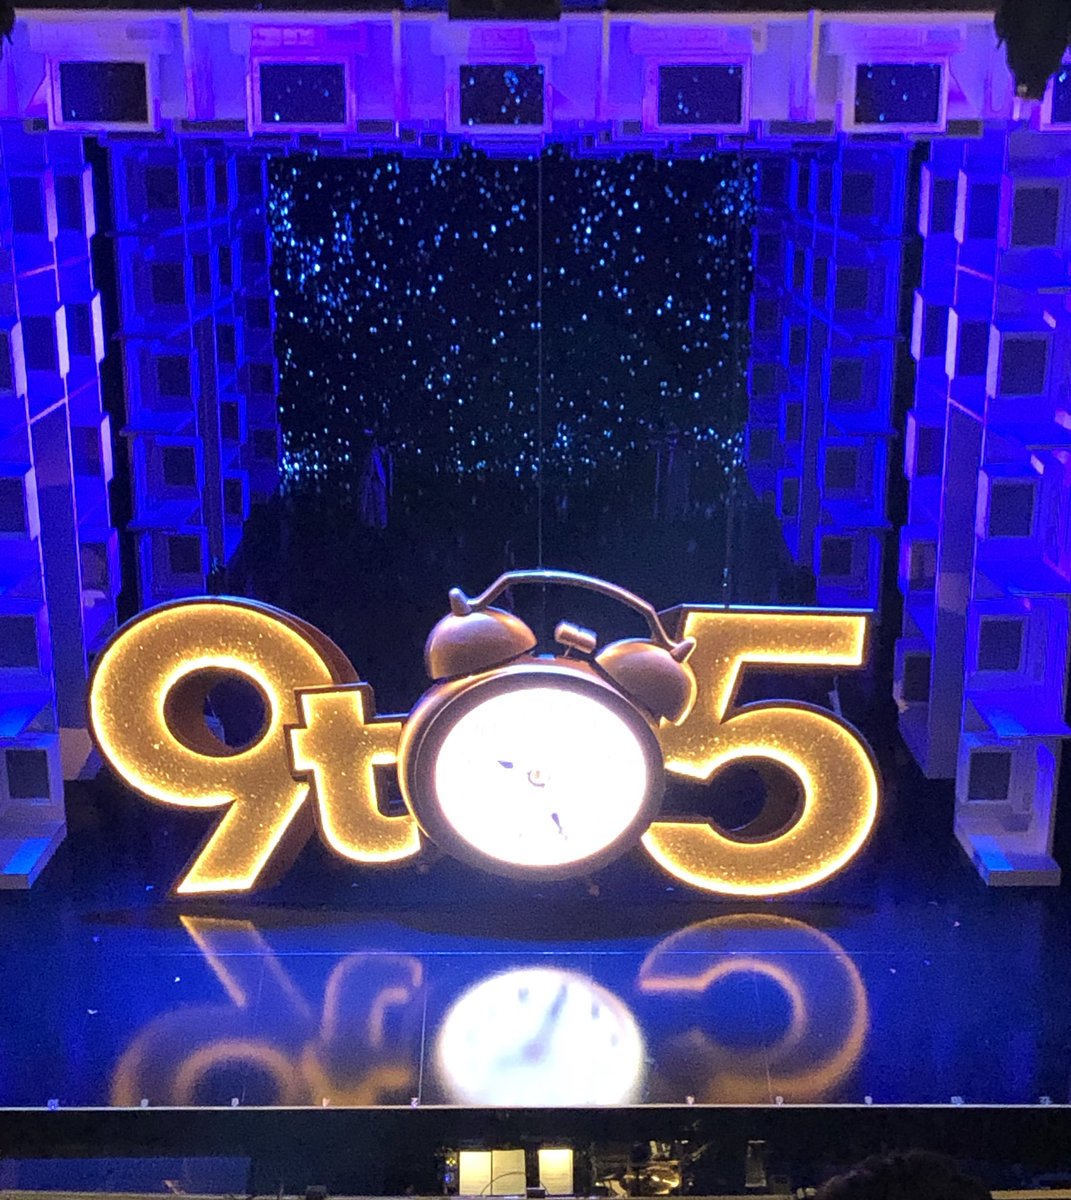 Thank you @9to5MusicalUK for an amazing evening! Such a great show. Cast were superb. #9to5TheMusical #DollyParton